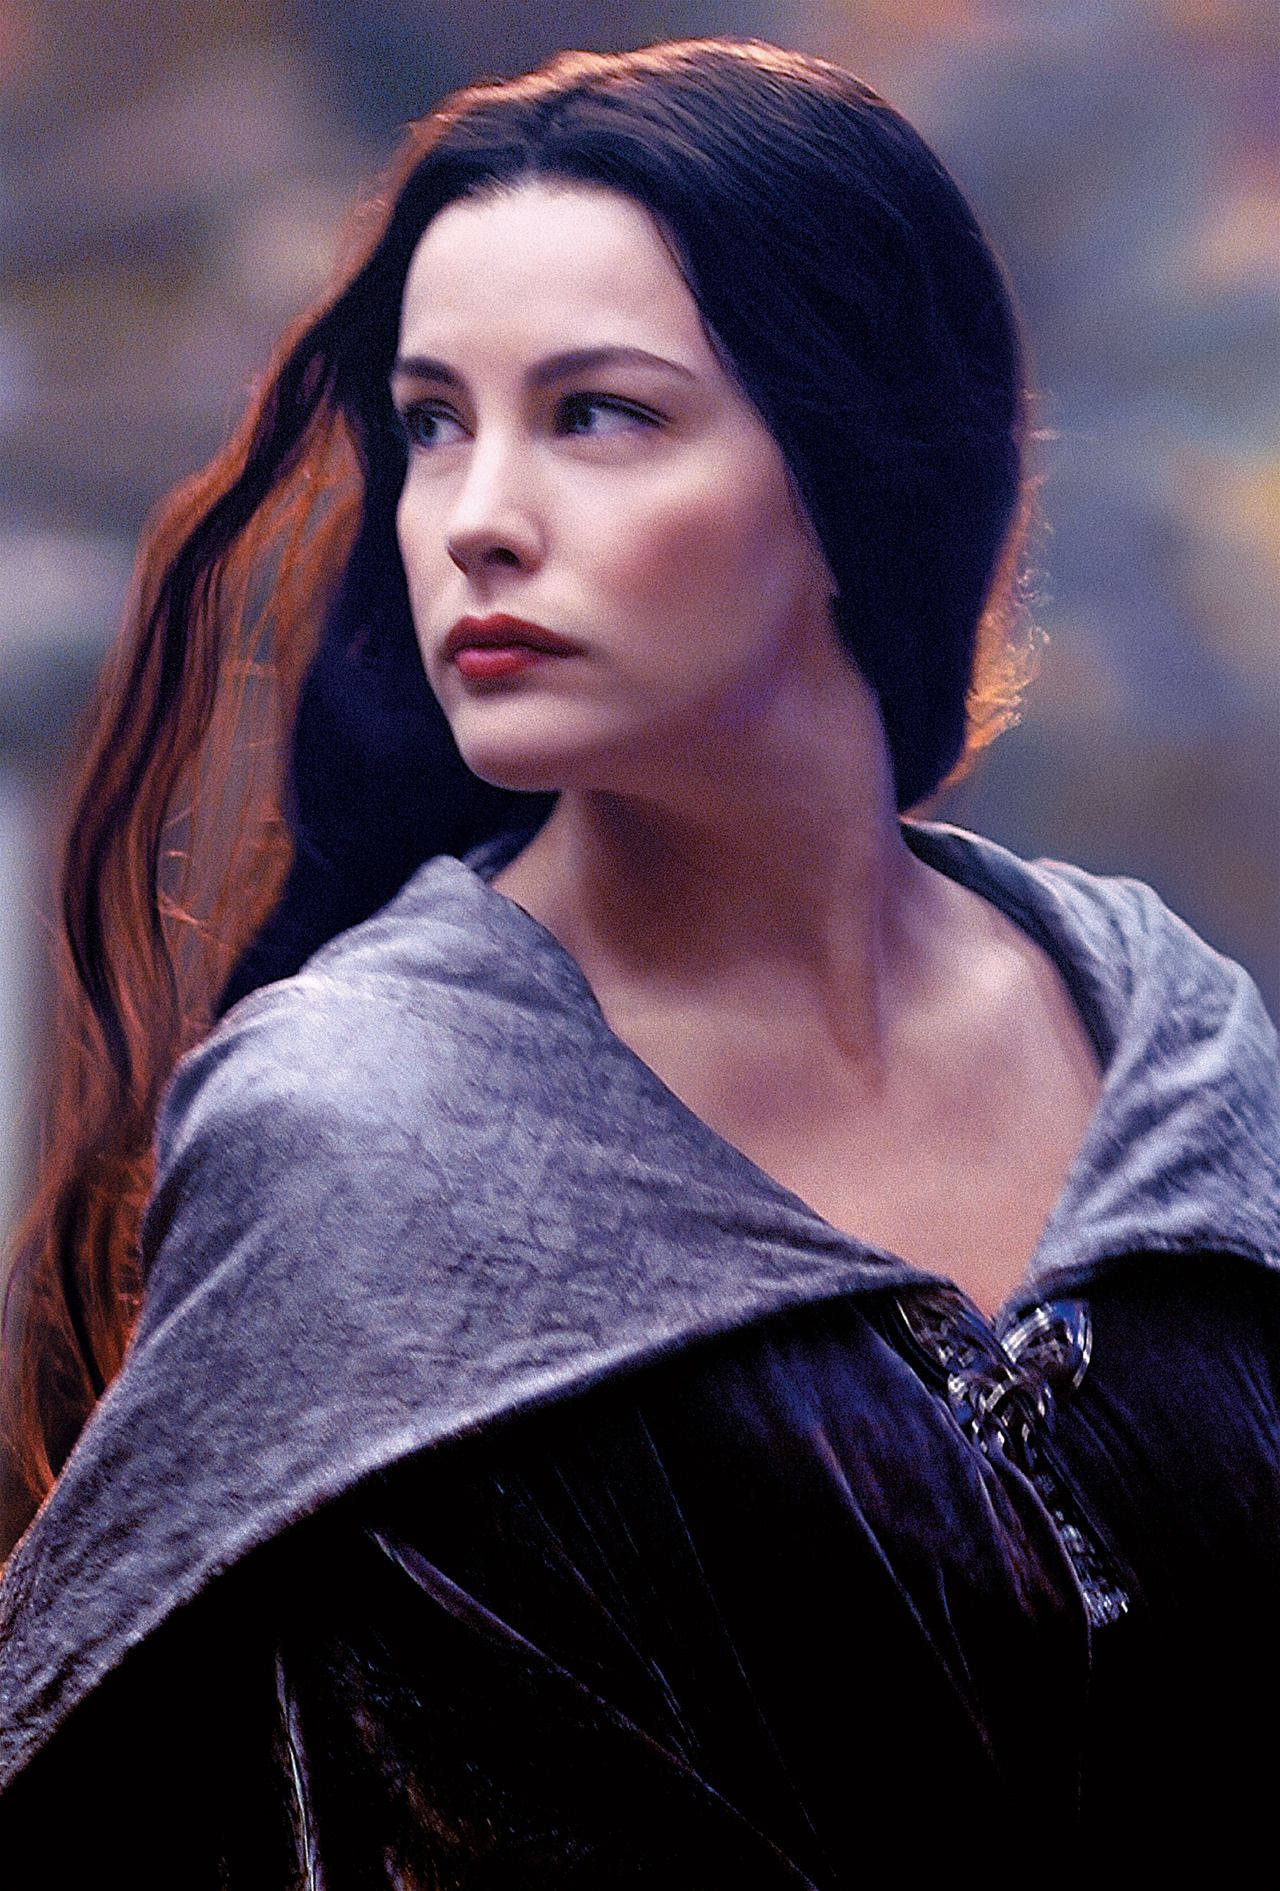 lord of the rings arwen wallpaper